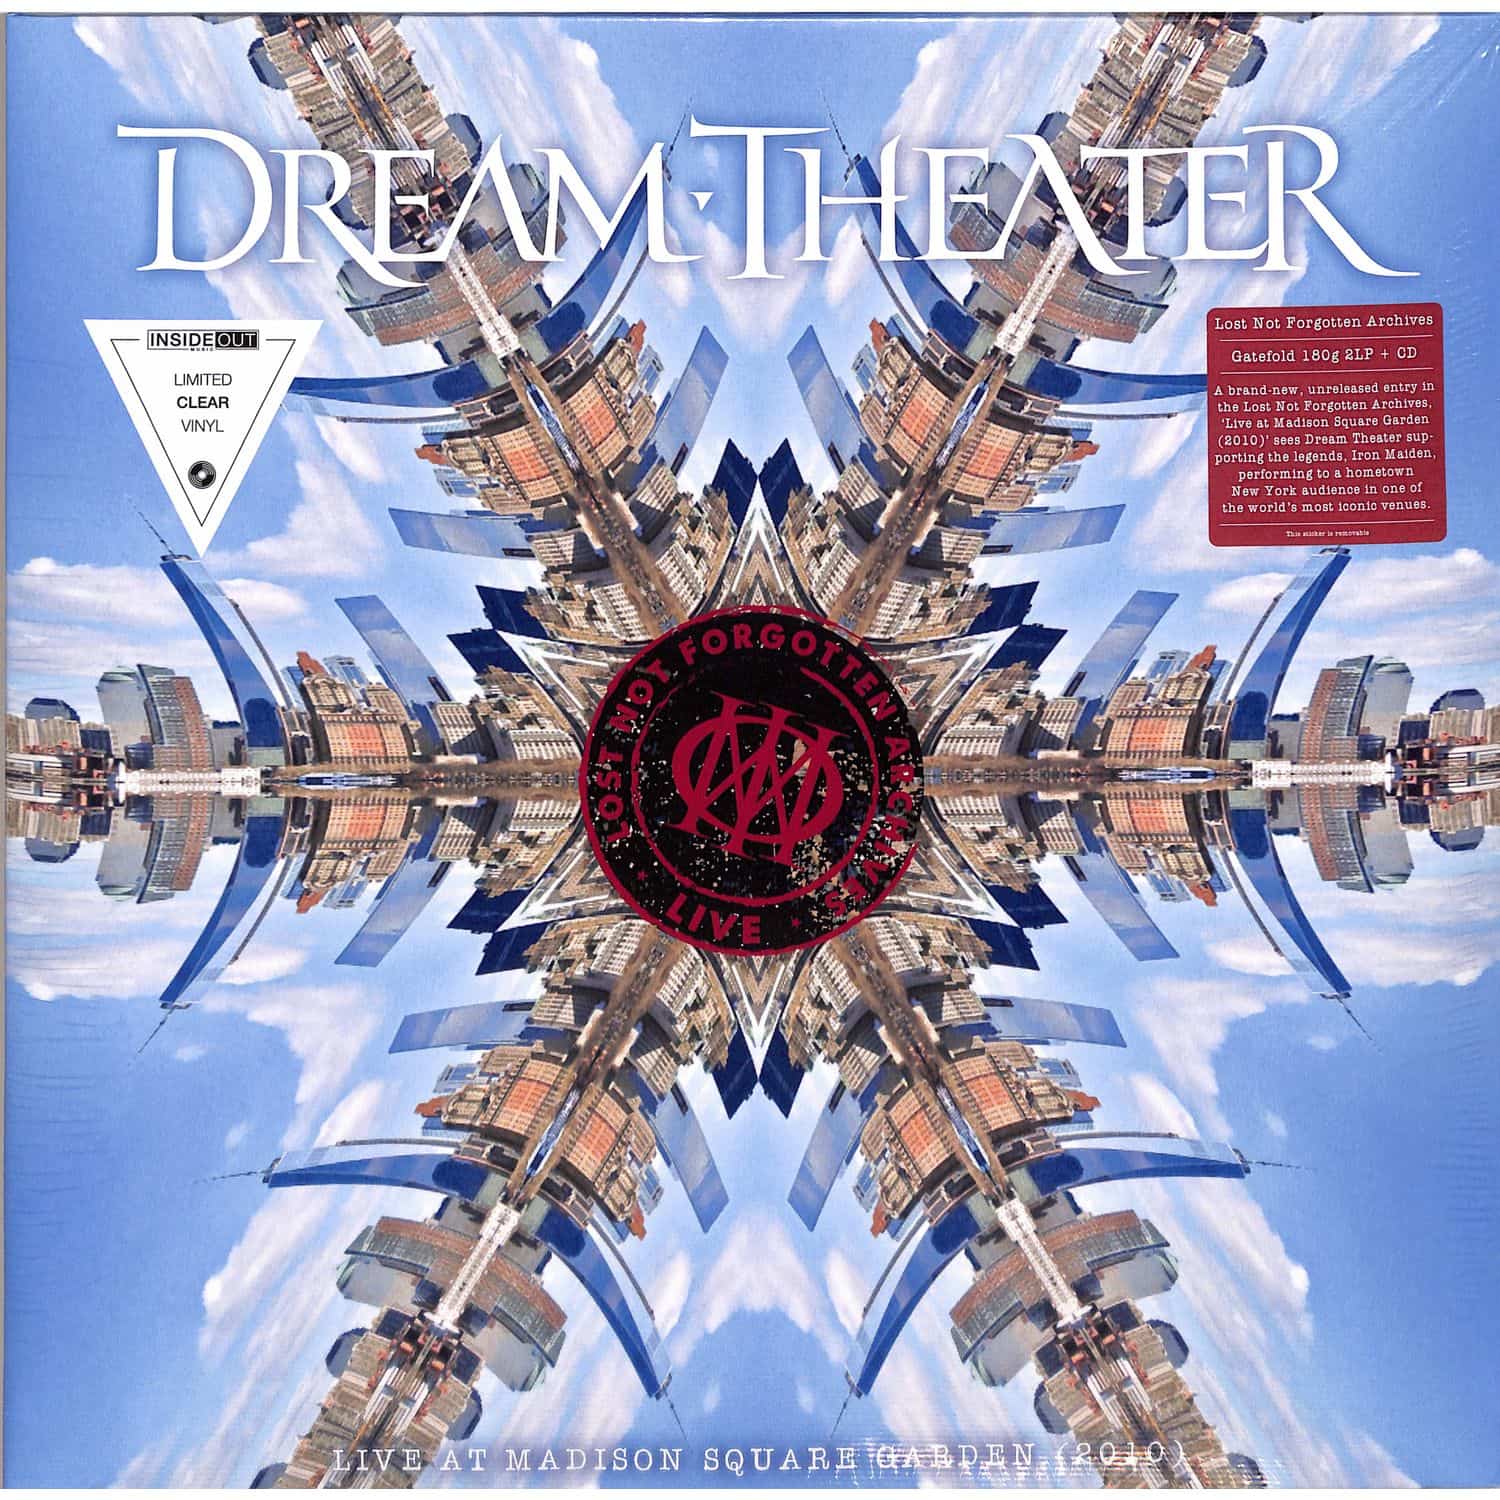 Dream Theater - LOST NOT FORGOTTEN ARCHIVES 